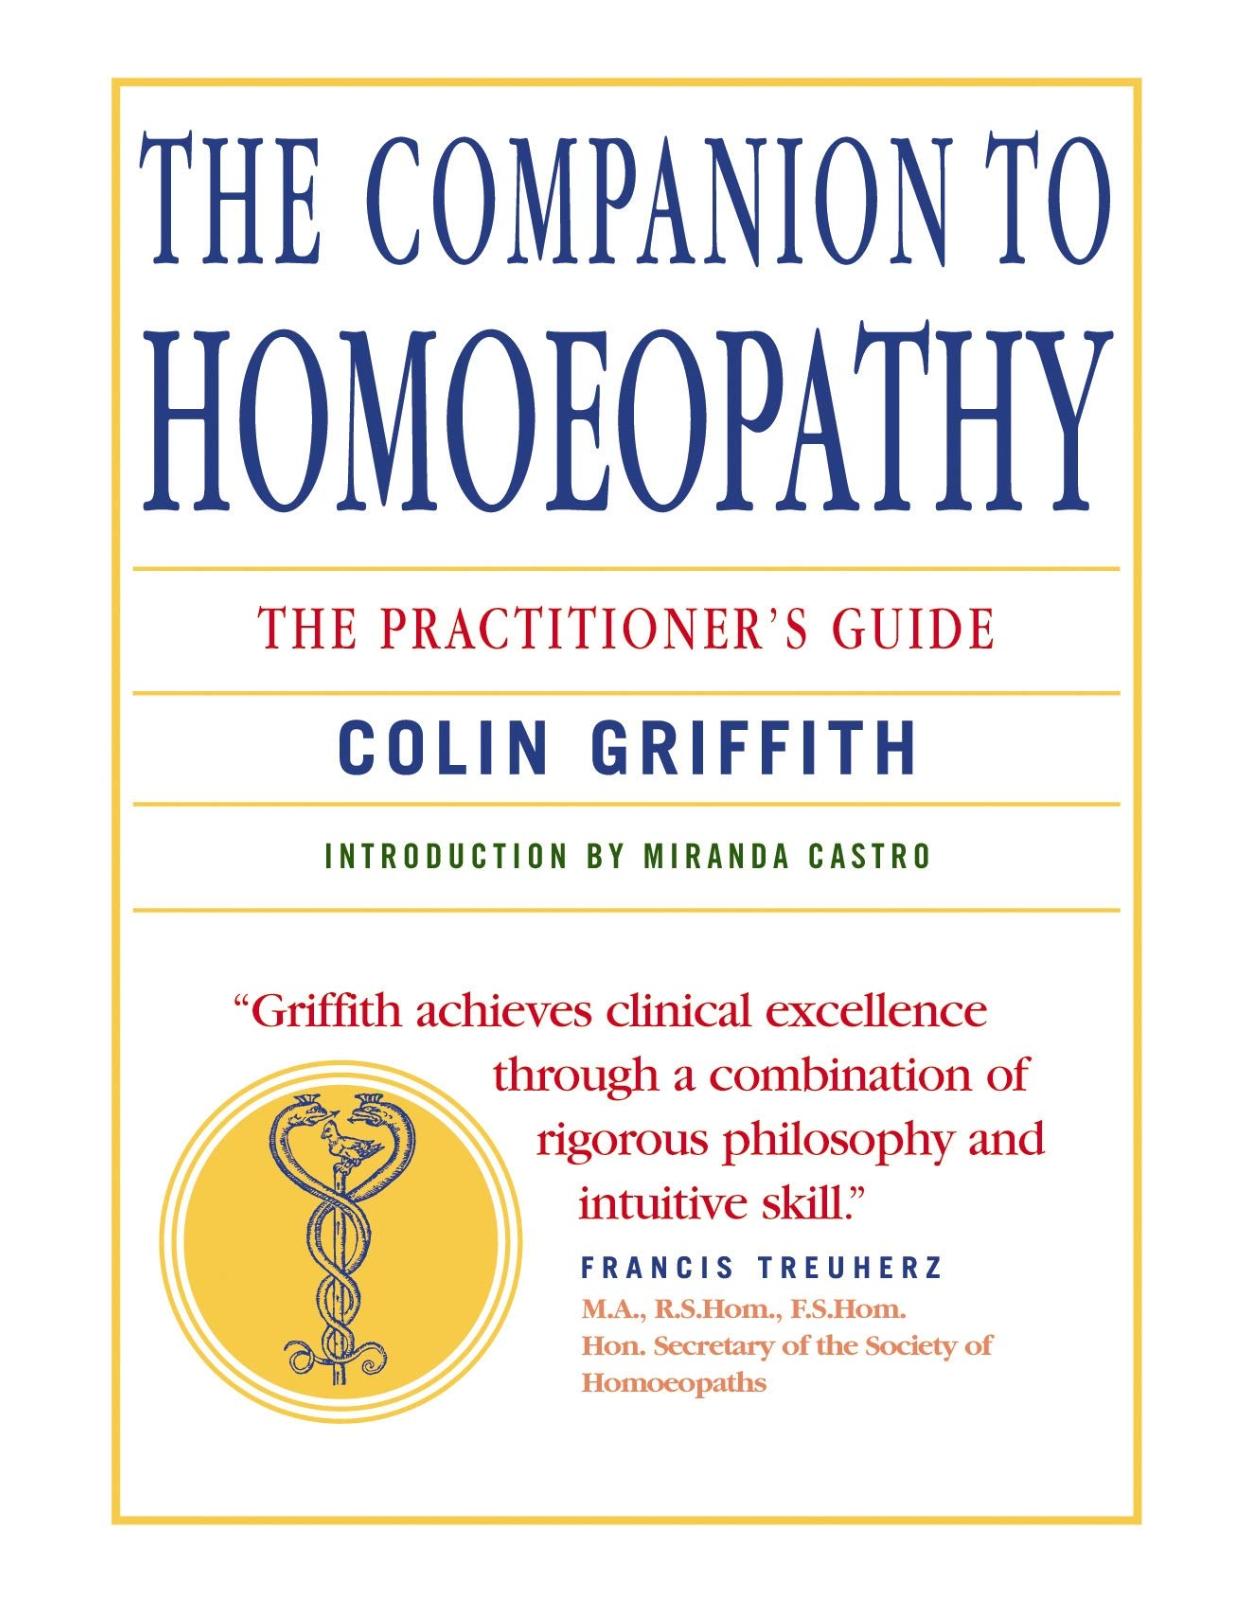 The Companion to Homoeopathy: The Practitioner's Guide